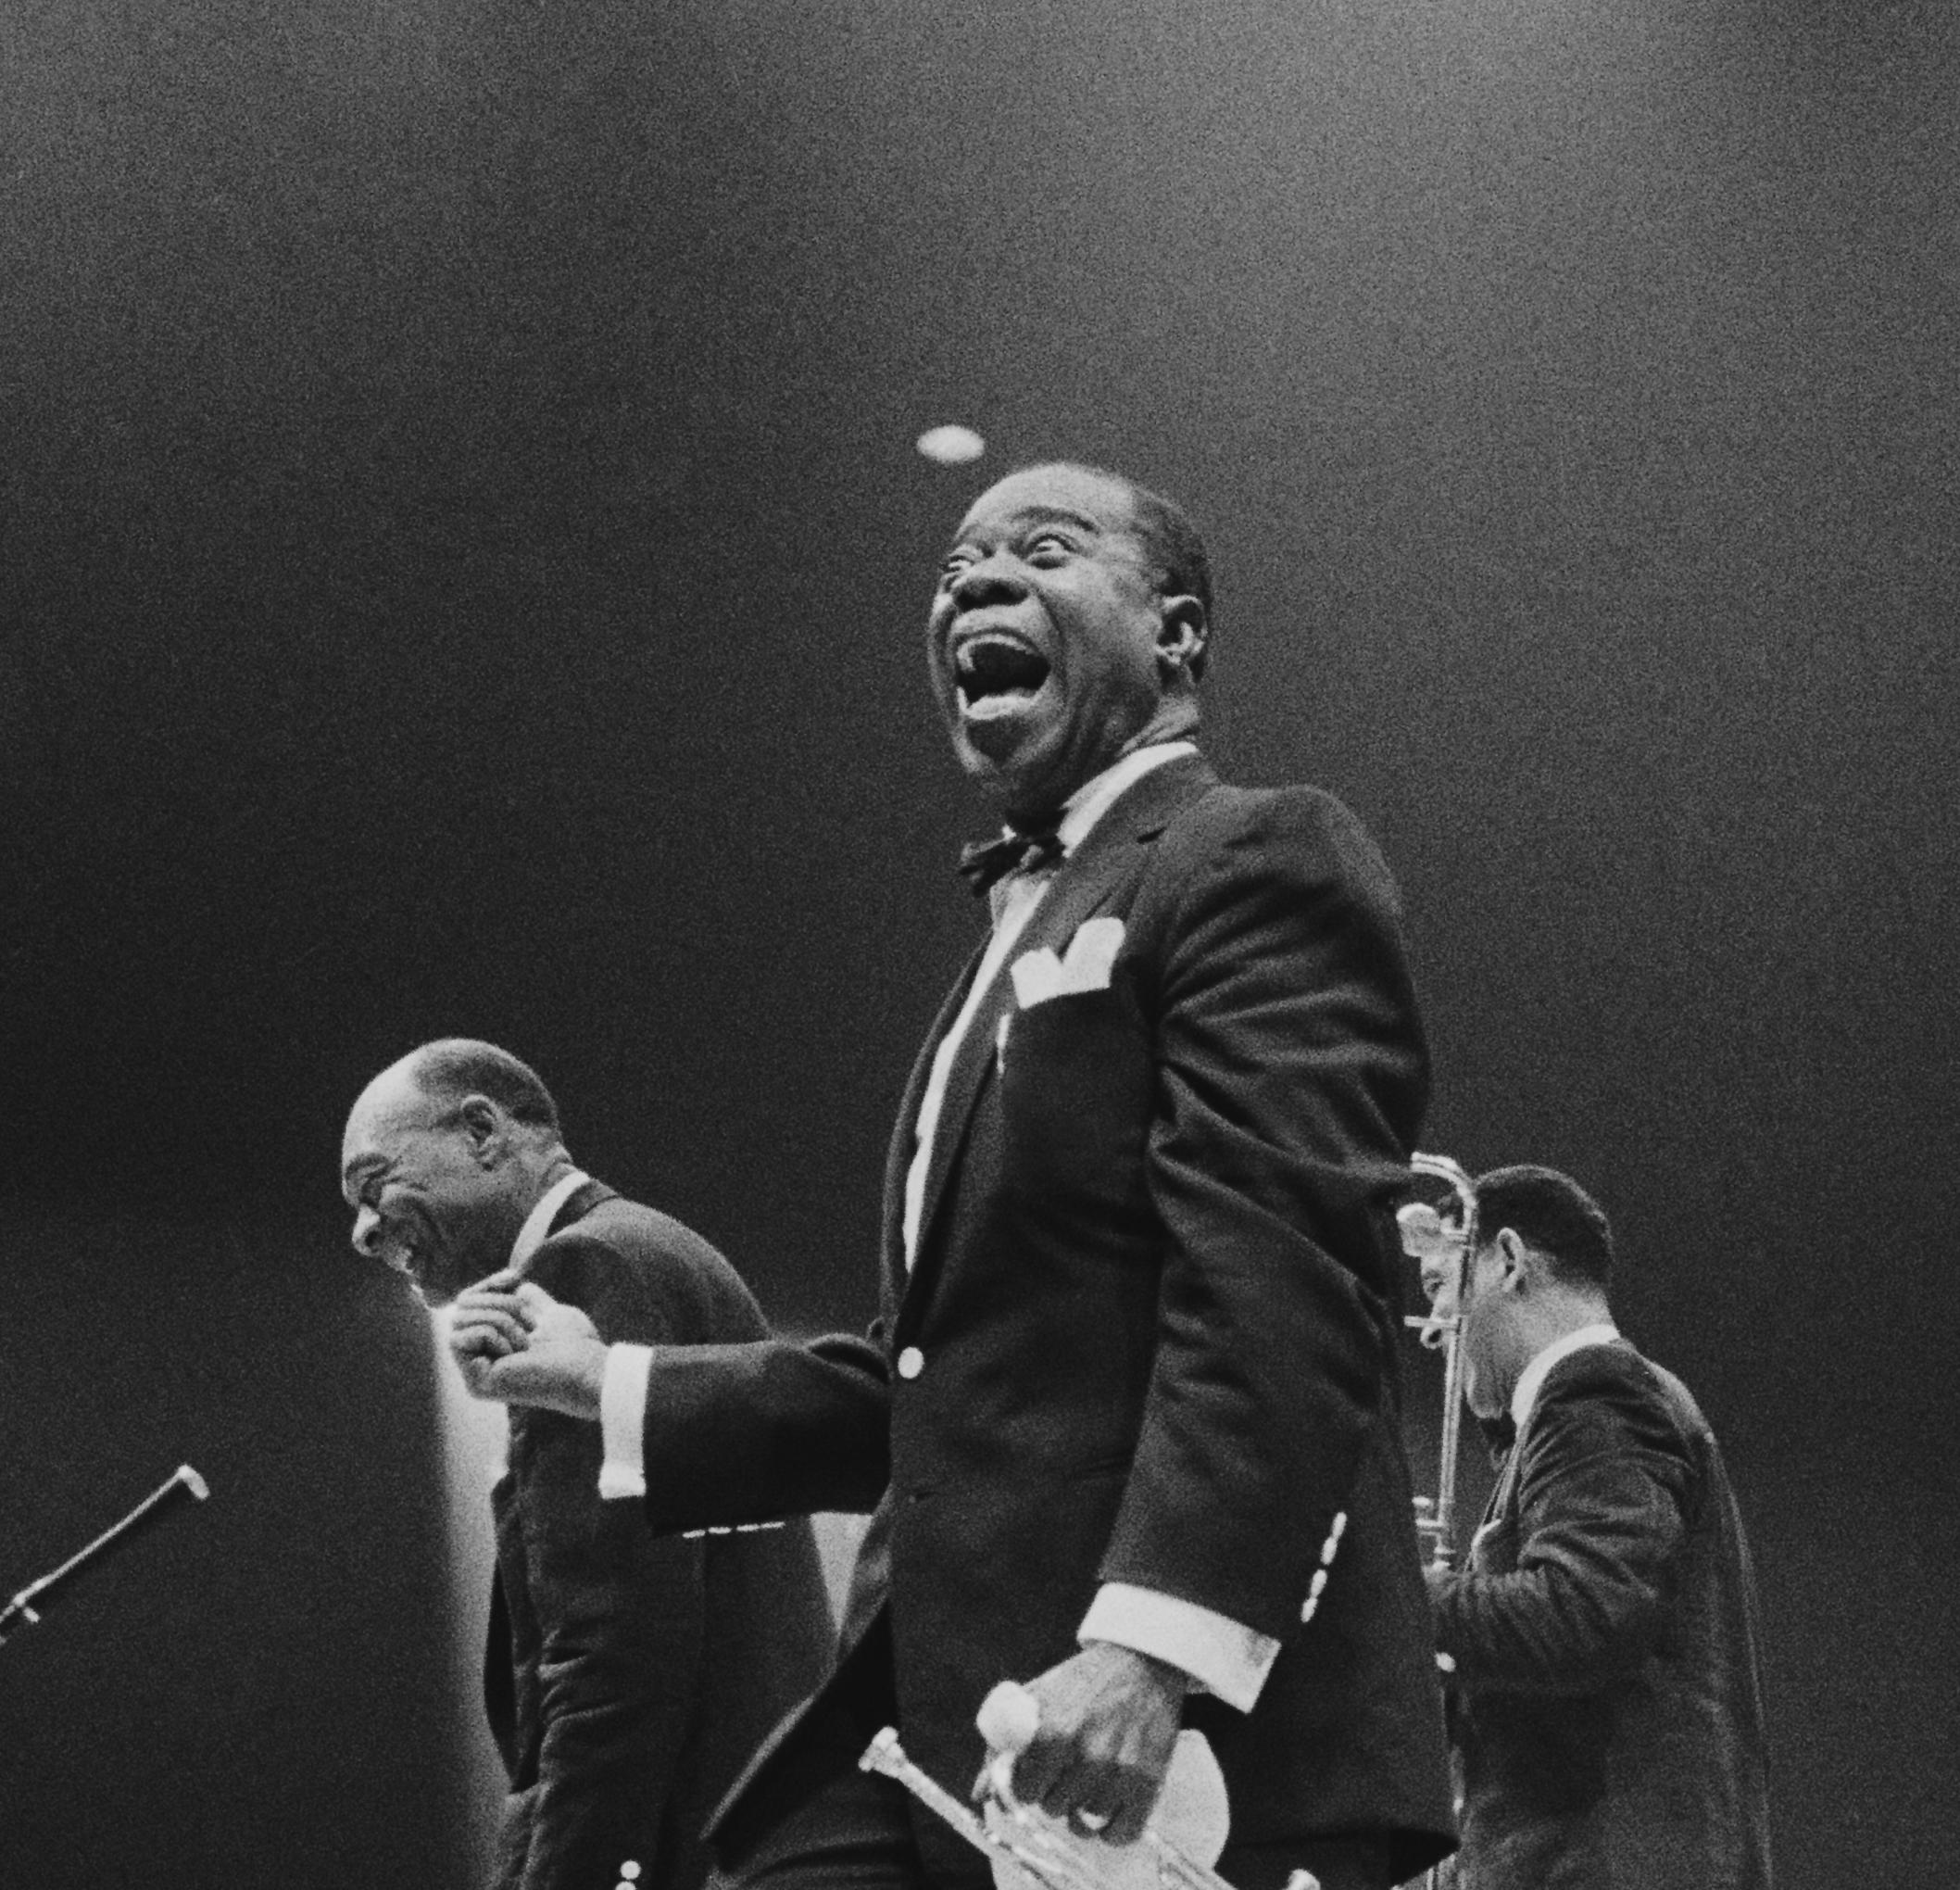 Louis Armstrong On Stage - Giant Oversize Limited Edition Silver Gelatin Print  - Photograph by Haywood Magee